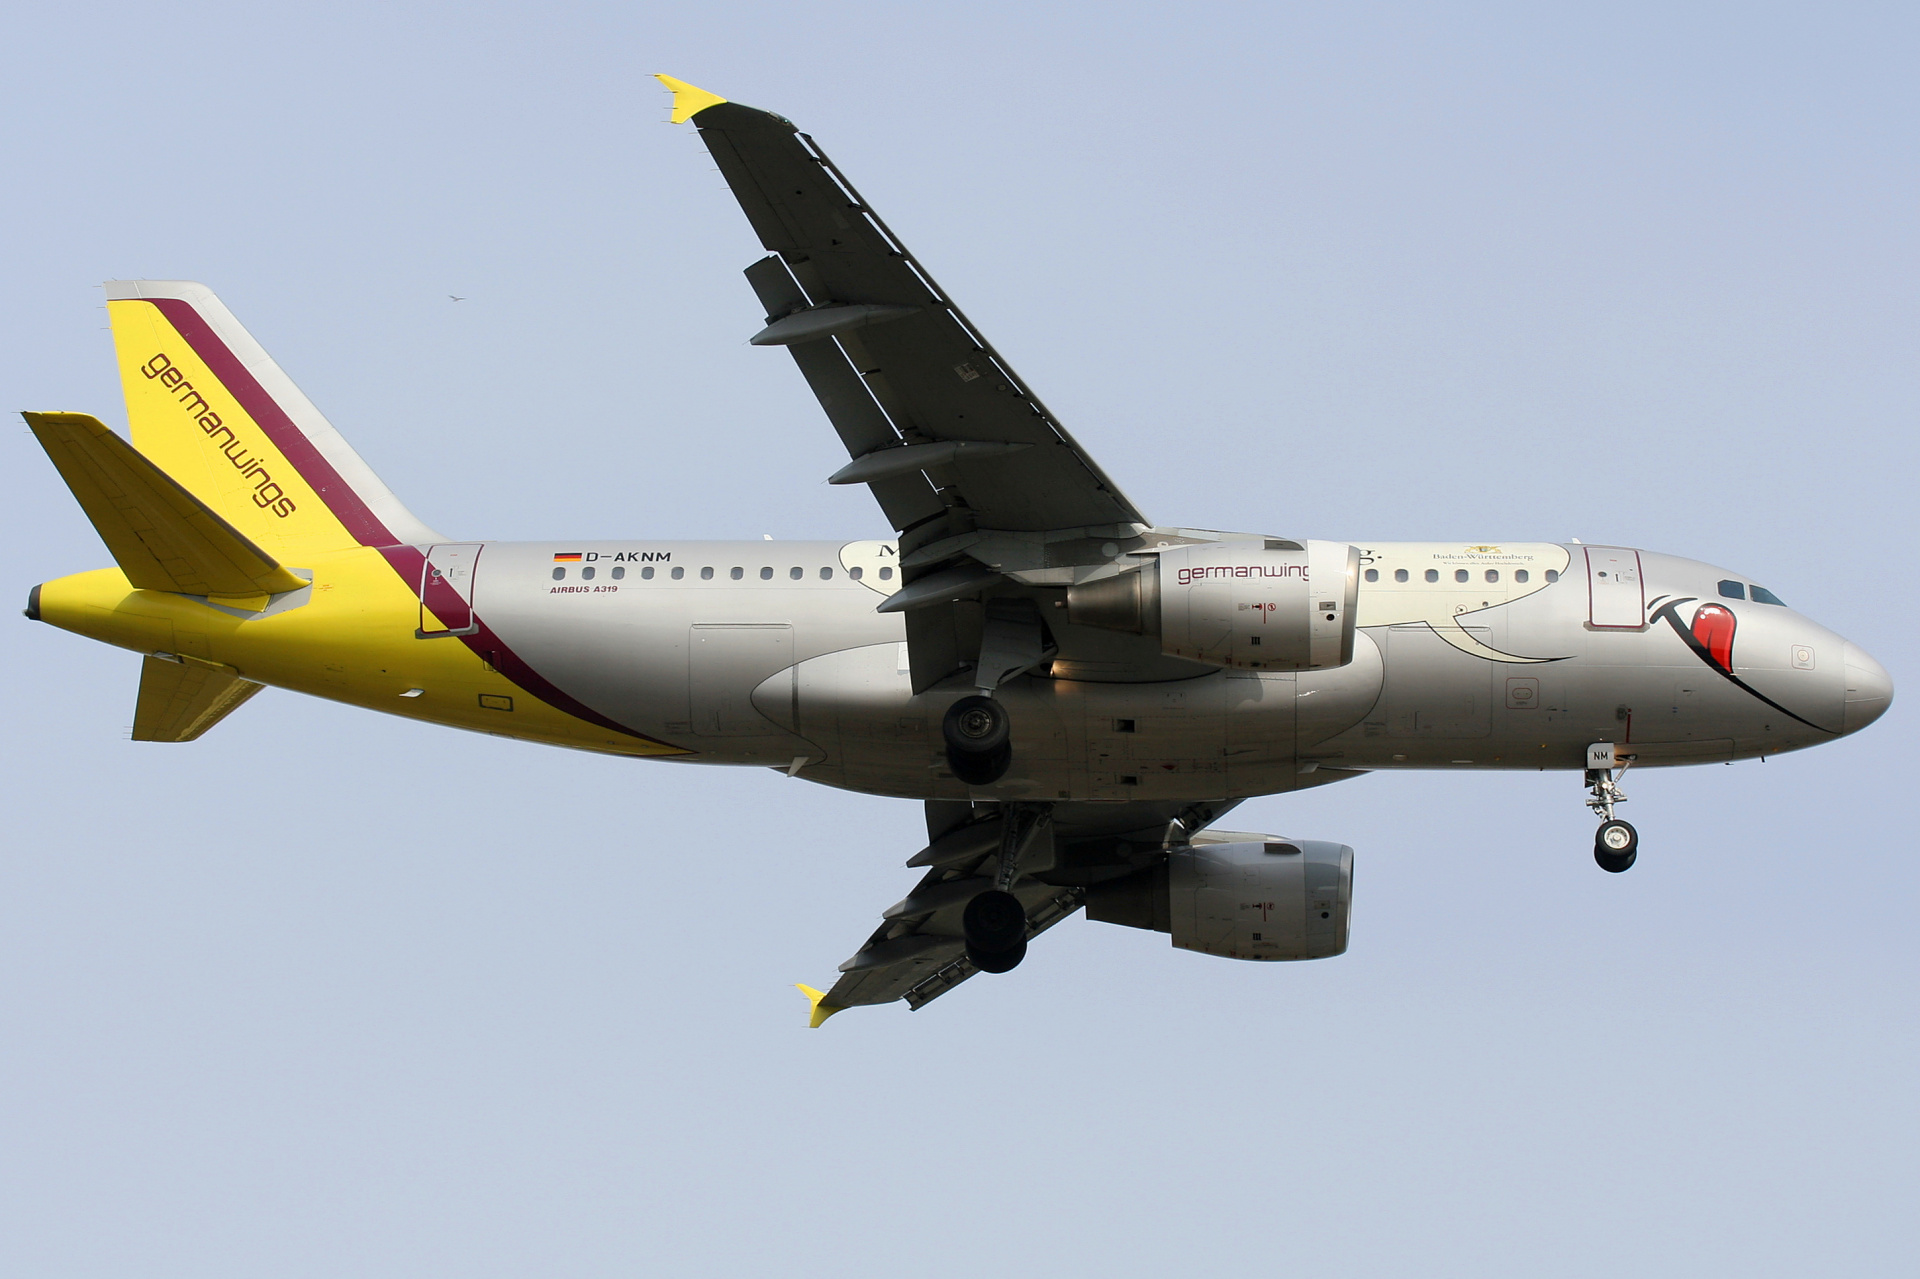 D-AKNM (Baden-Württemberg livery) (Aircraft » EPWA Spotting » Airbus A319-100 » Germanwings)